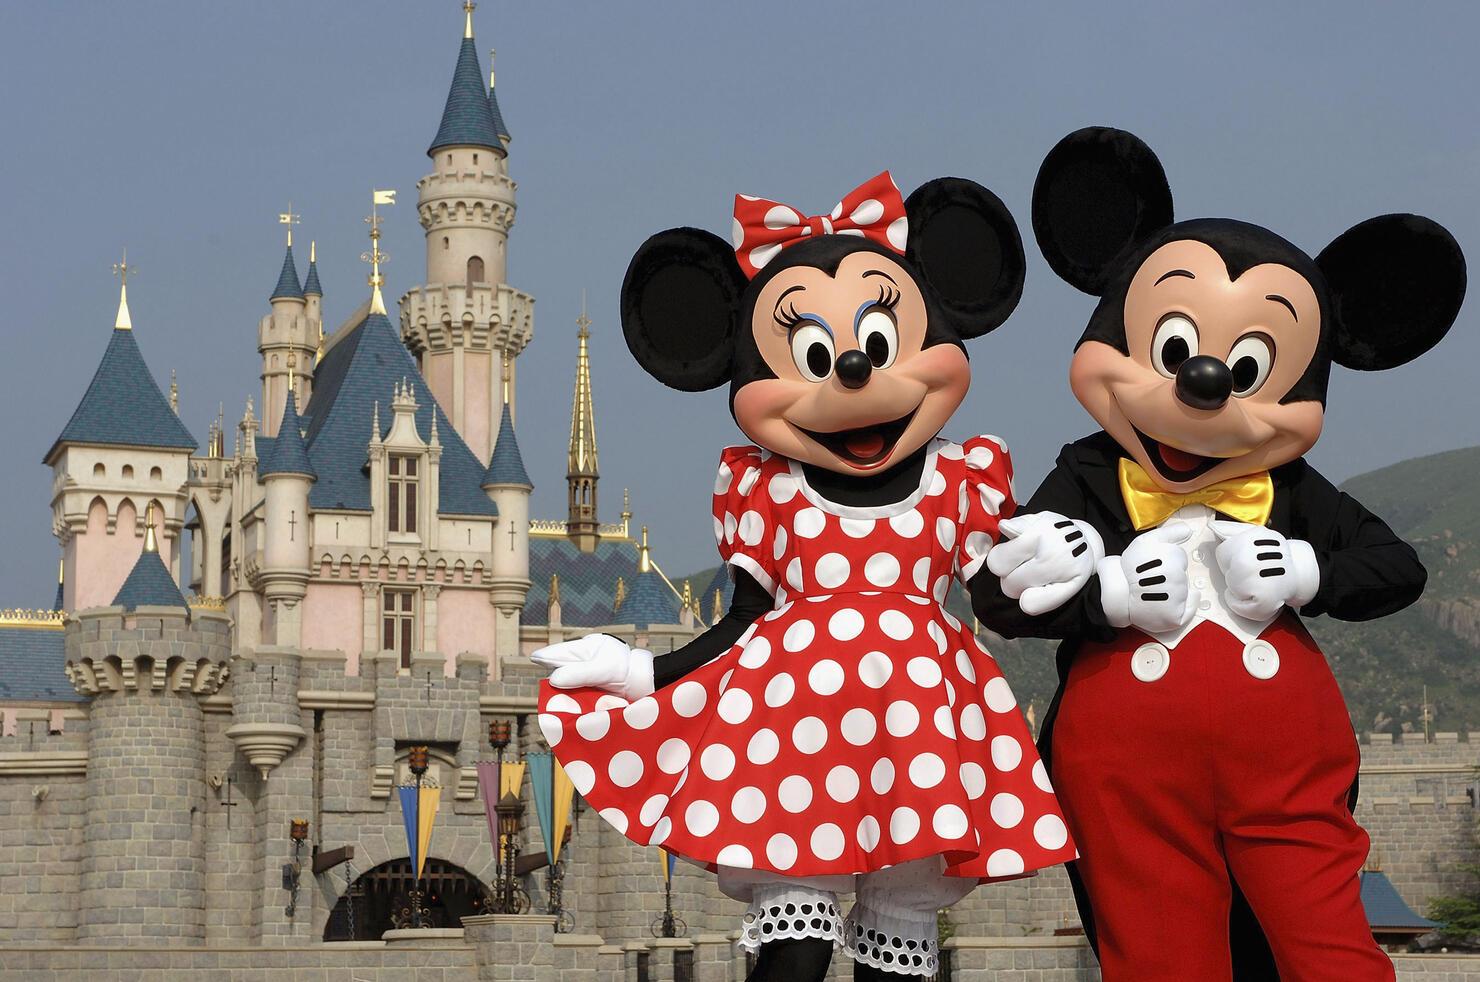 Finally, We Say Goodbye to Disney's Mickey Mouse - Inside the Magic